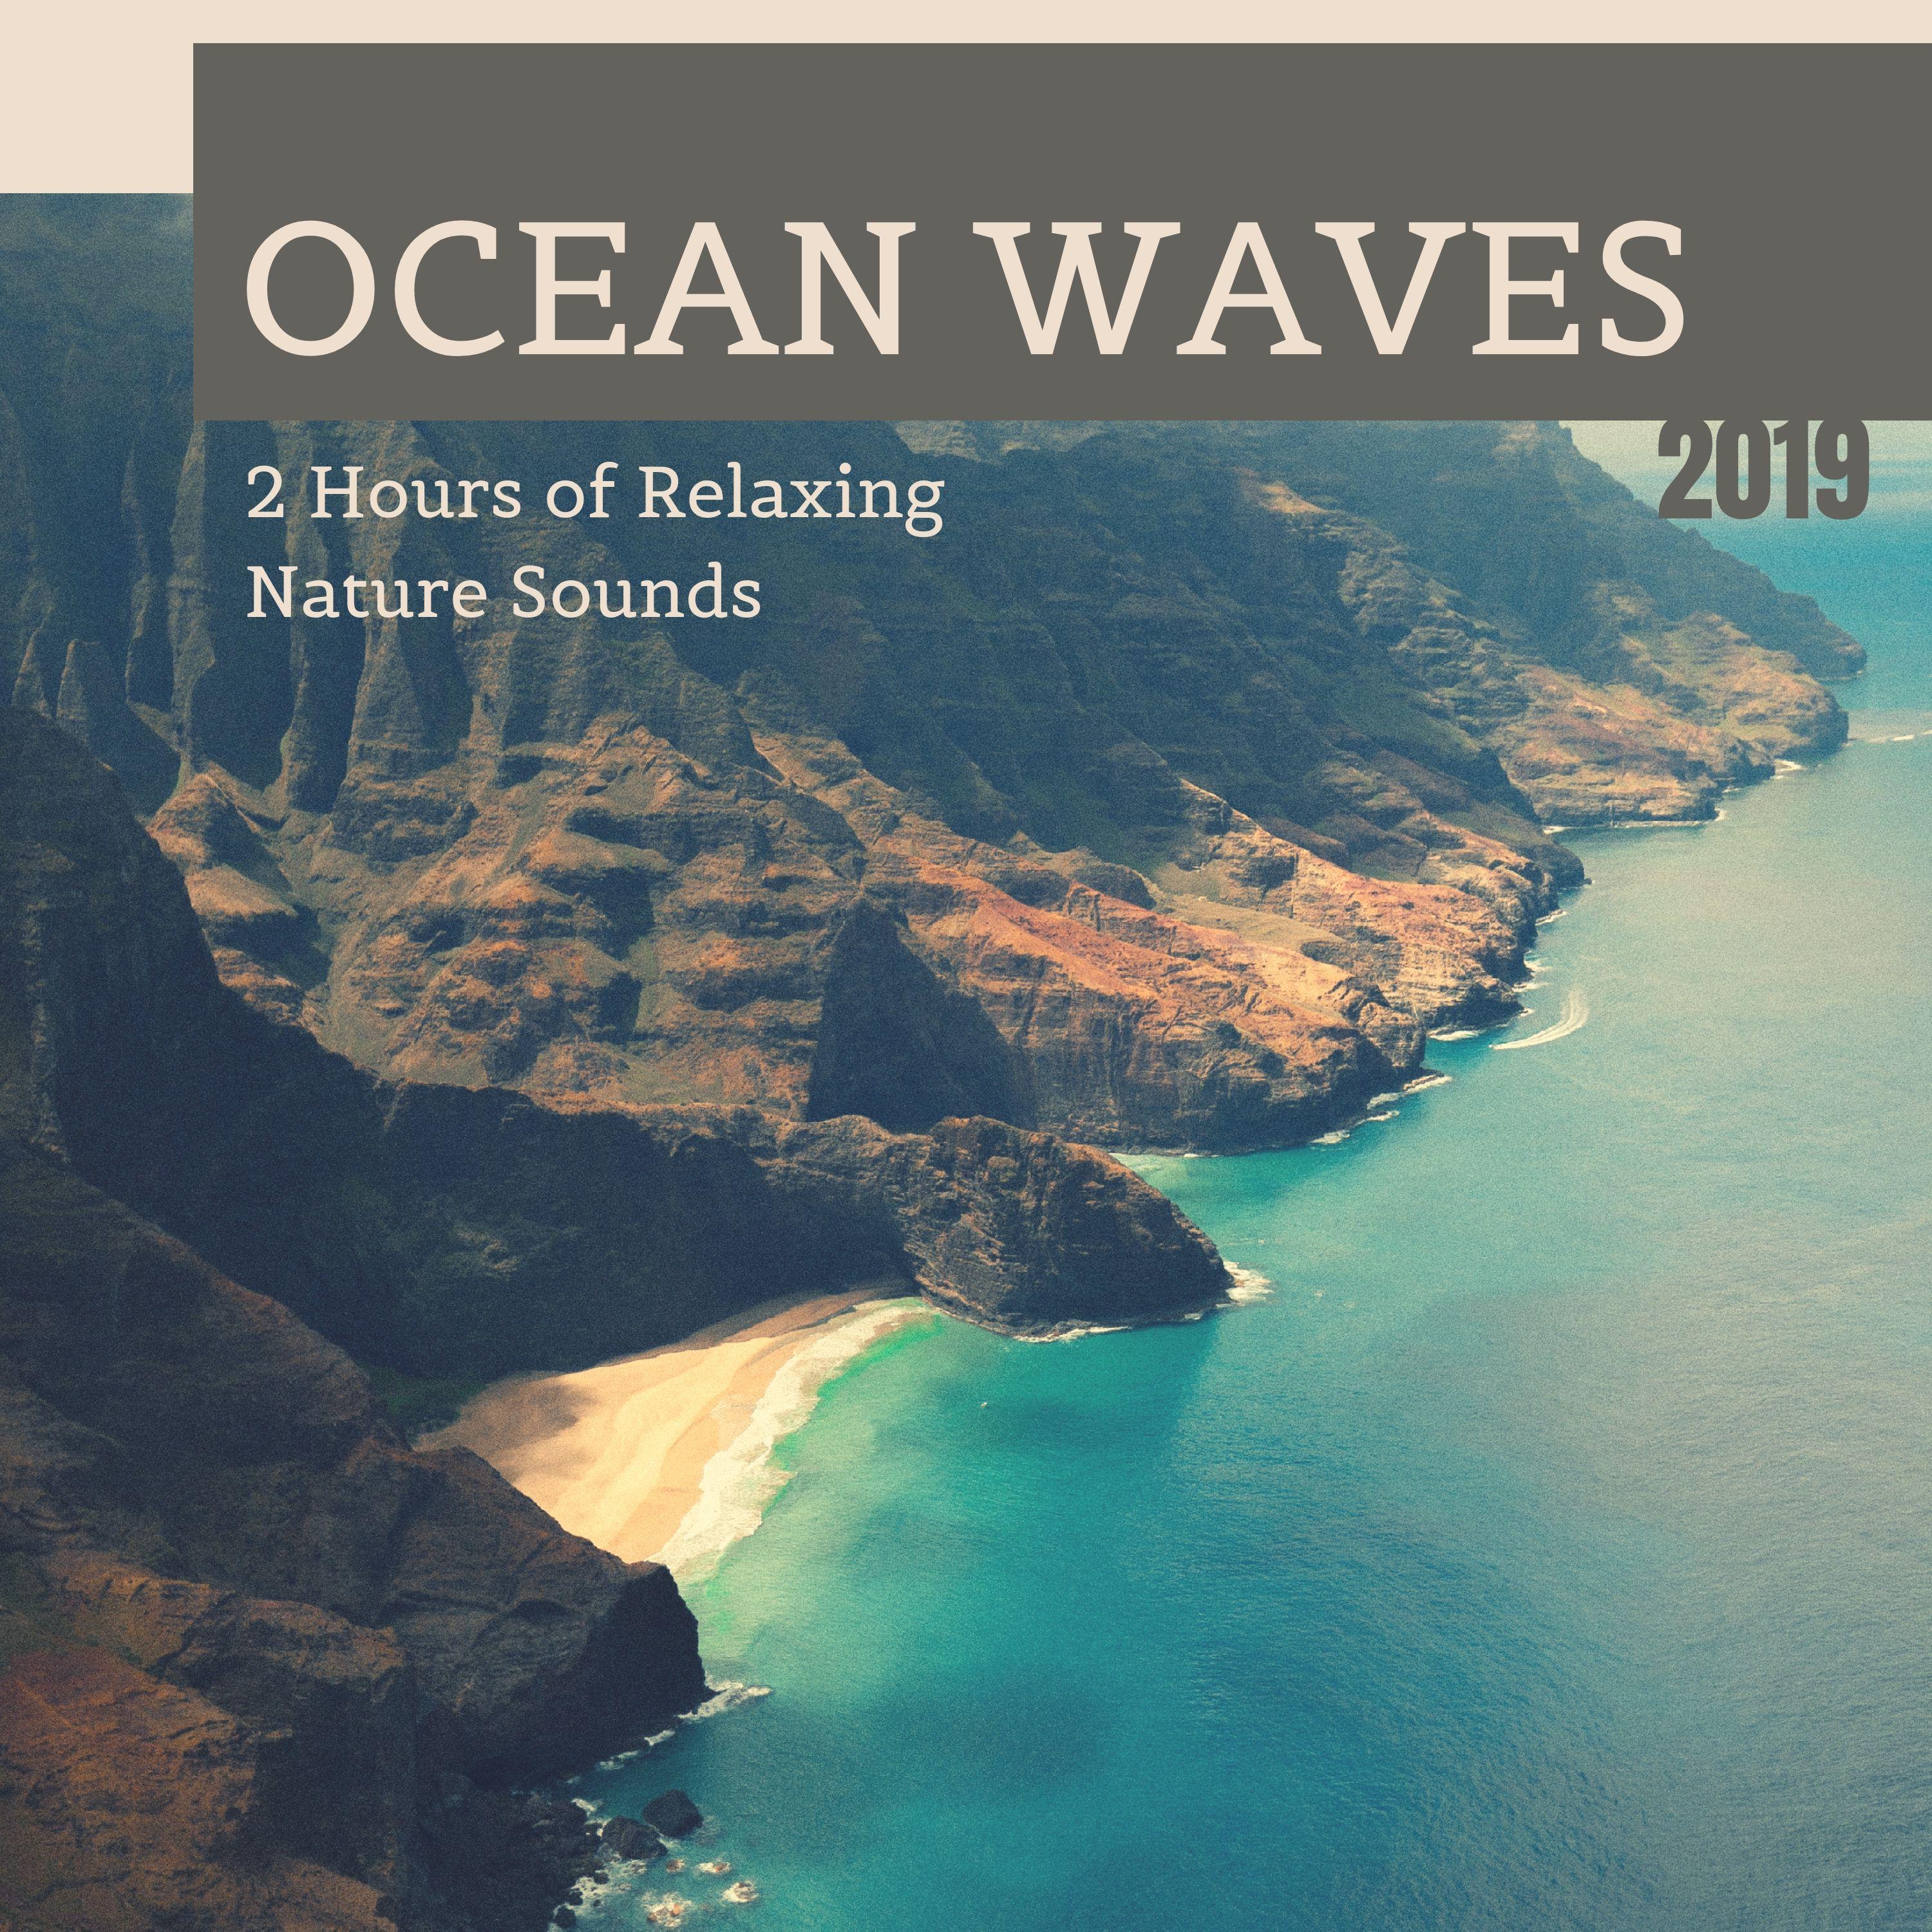 Ocean Waves 2019 - 2 Hours of Relaxing Nature Sounds